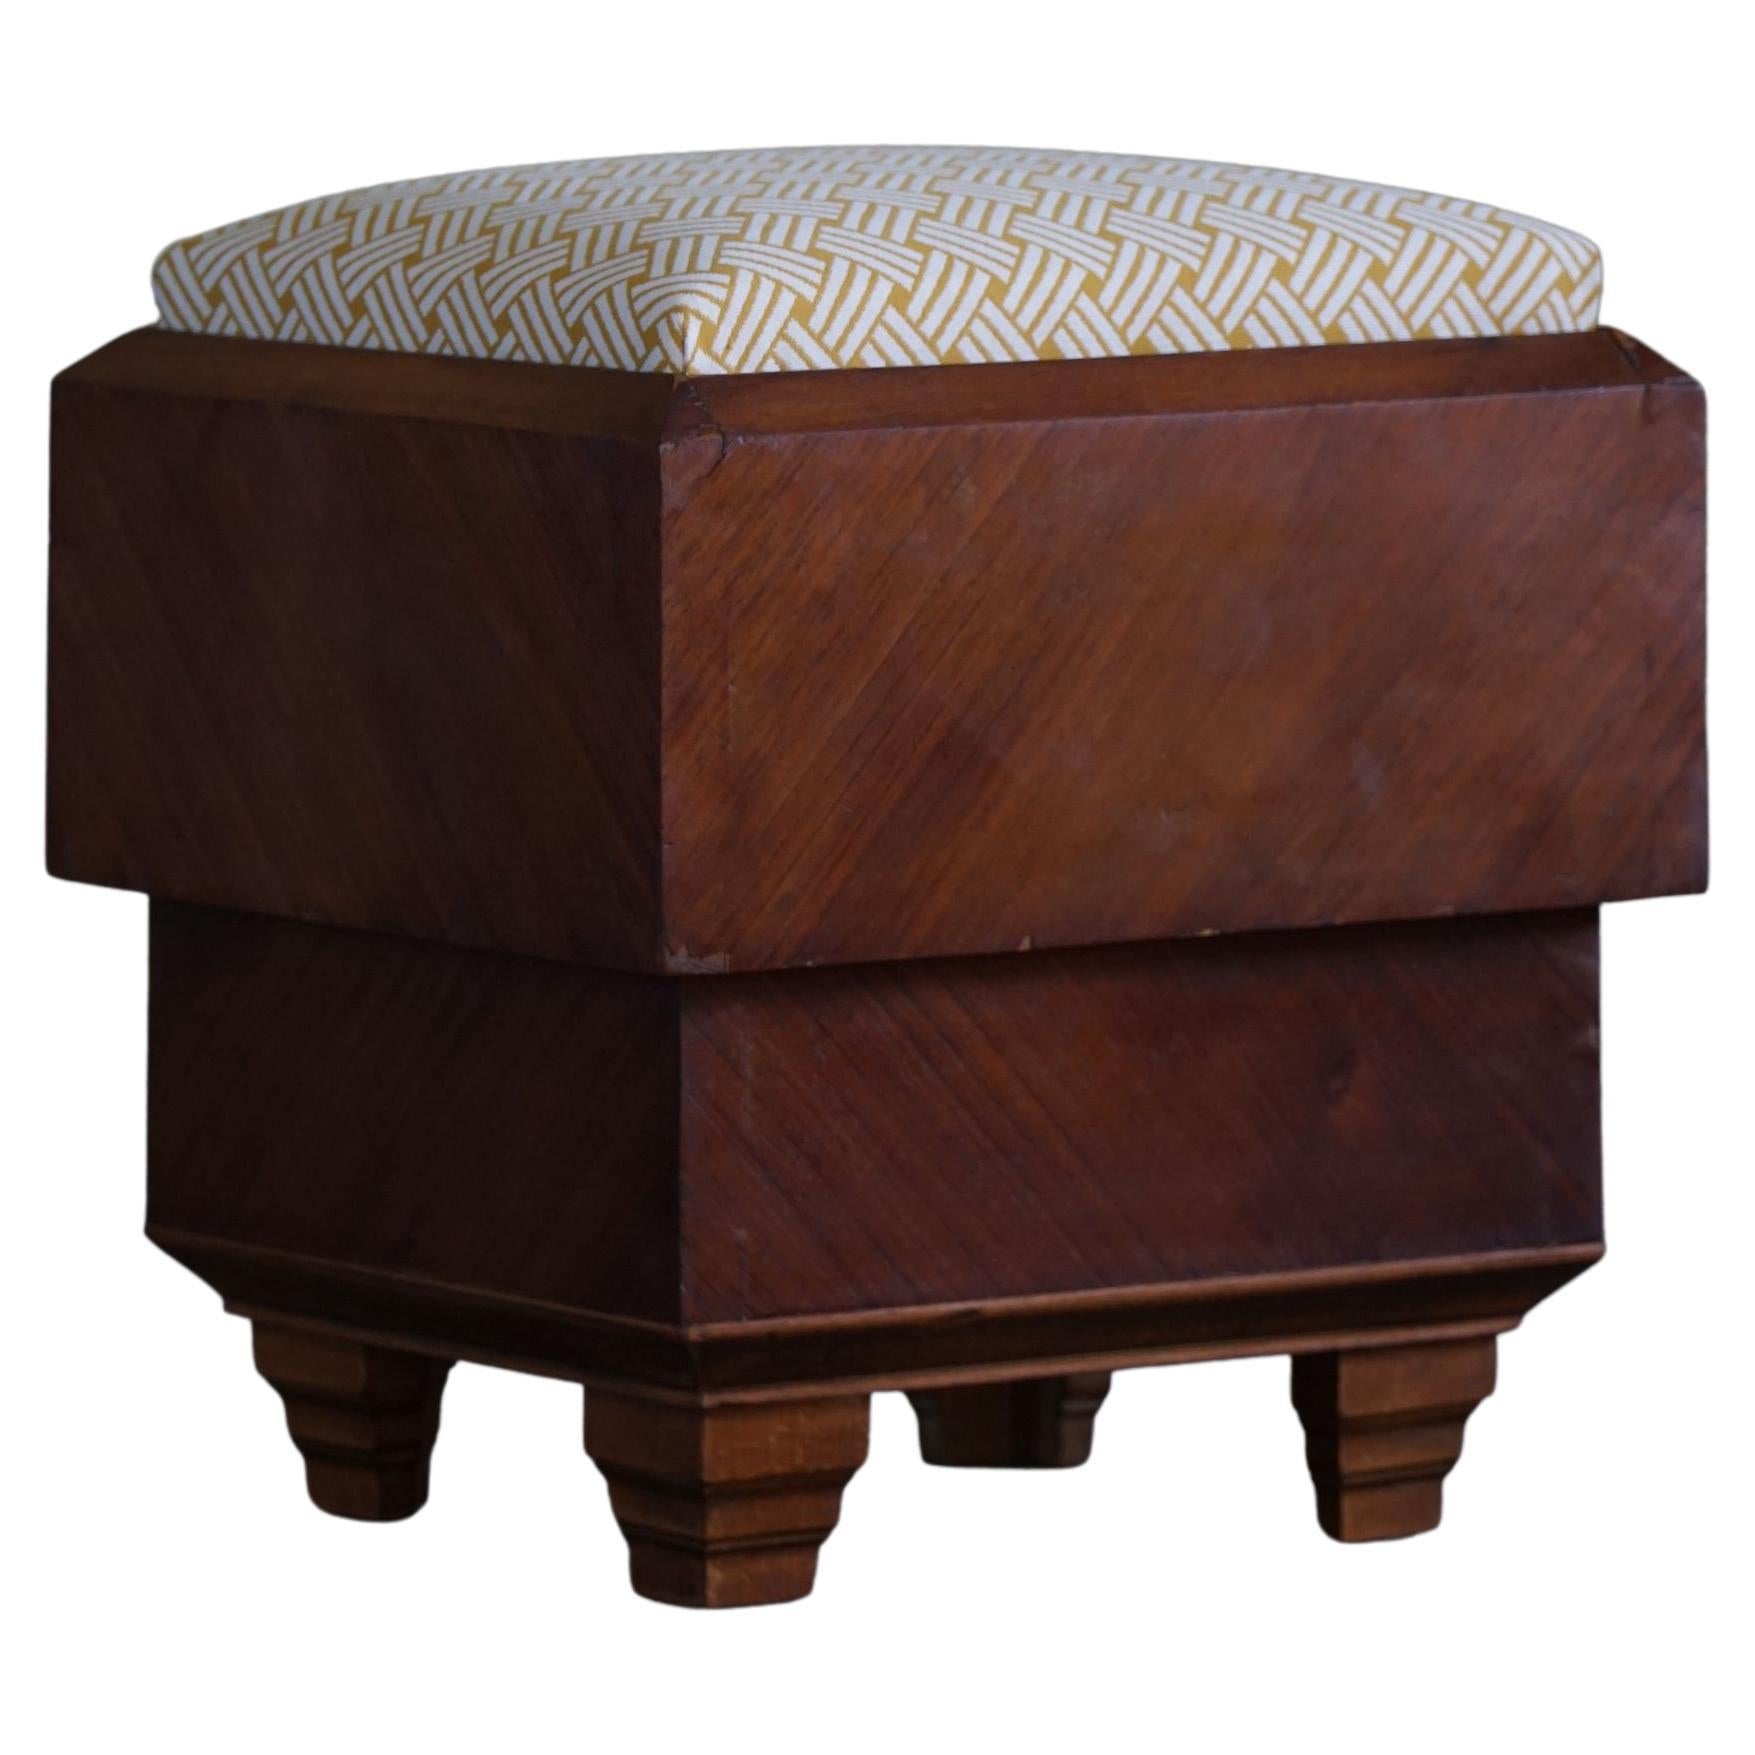 French Art Deco, Sculptural Square Stool with Storage, Made in 1930s